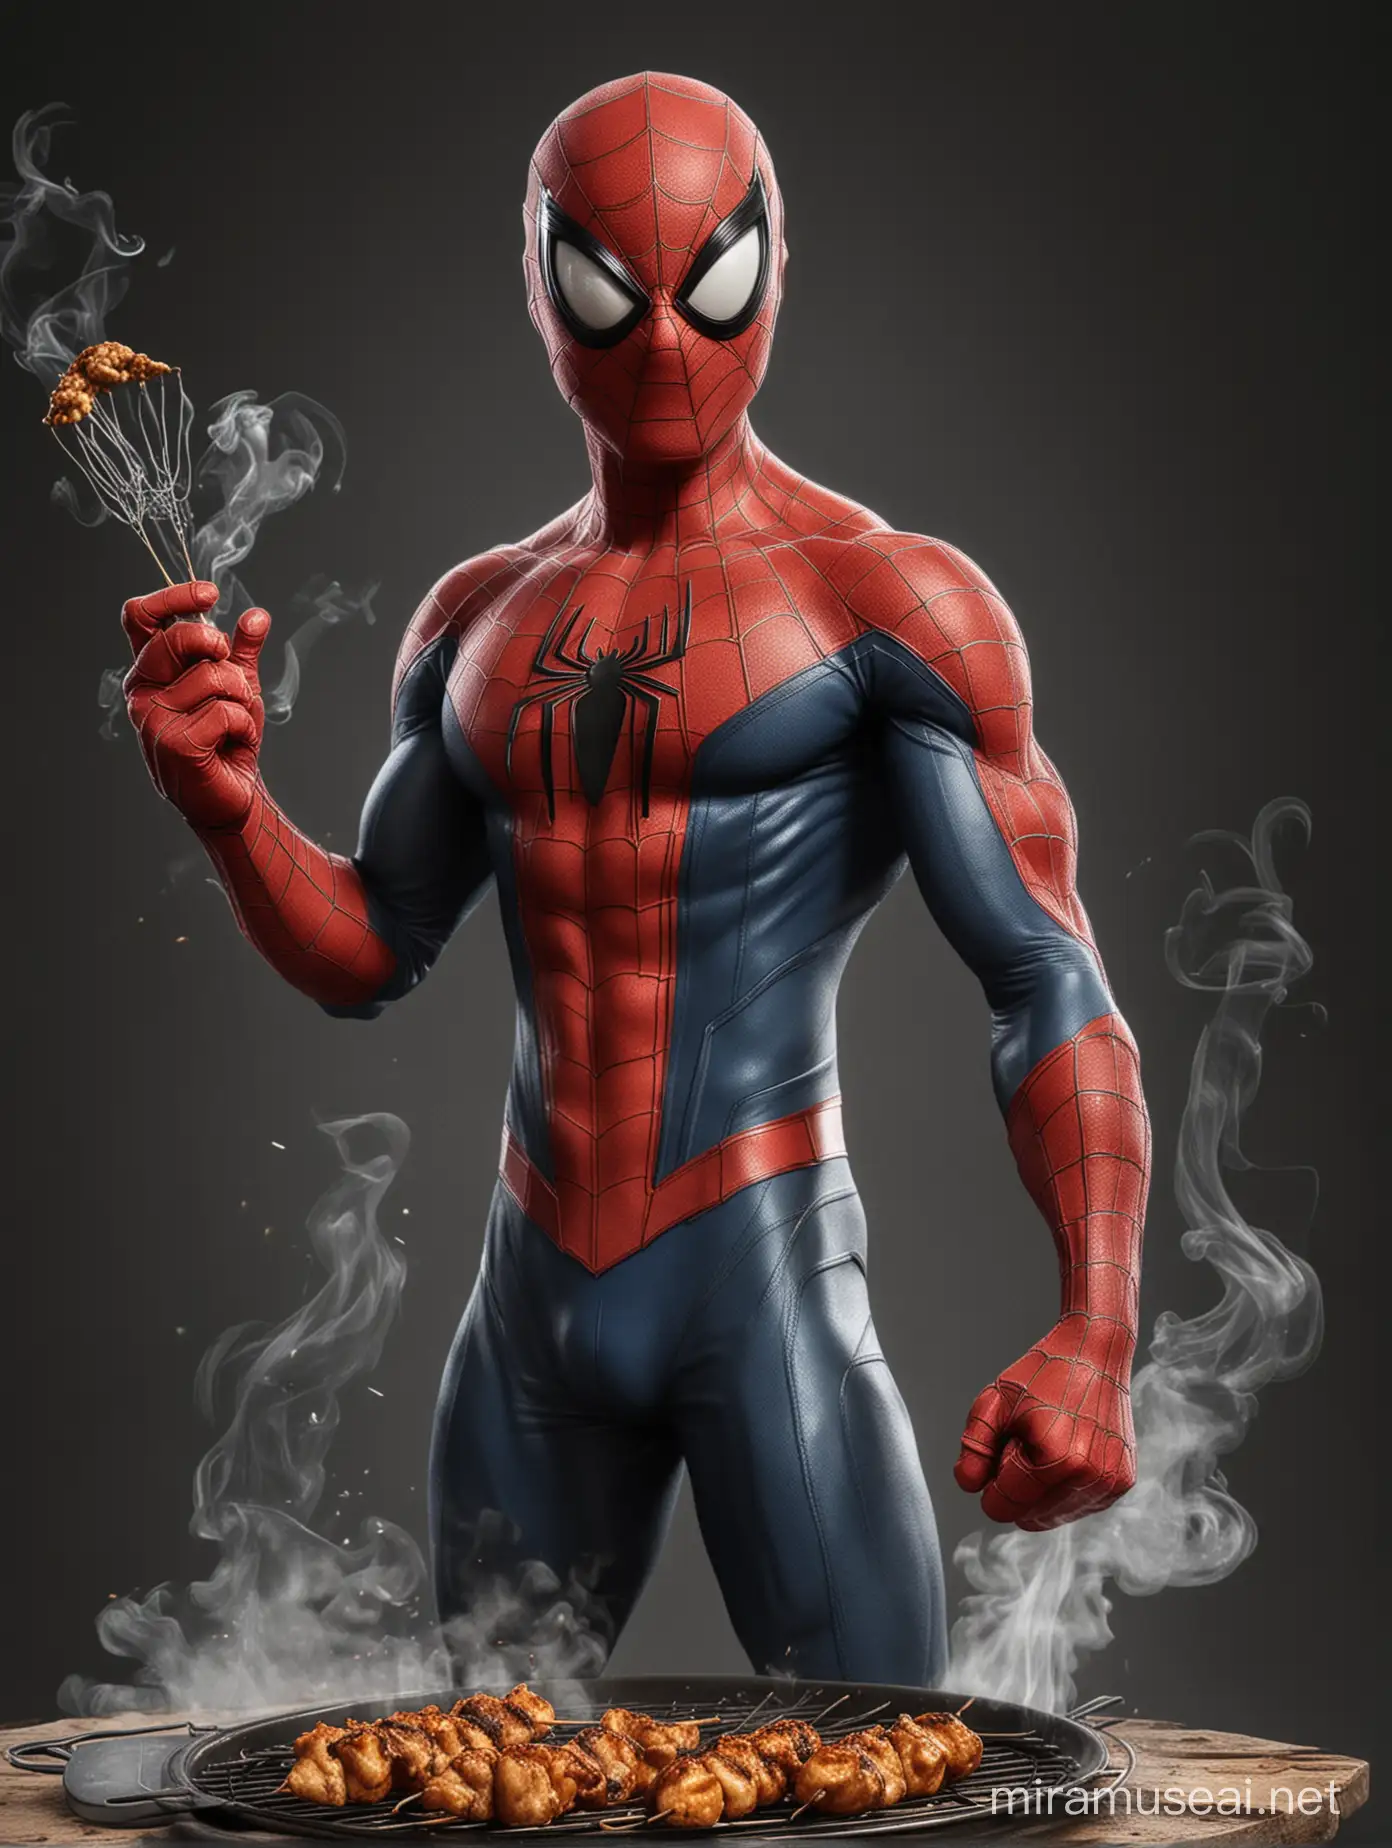 Create a realistic caricature picture of the superhero from Marvel "Spiderman" is seen a grill and spiderman grilling satay with a dramatic smoke effect and also spider webs in back but no background, by maintaining the character of Spiderman, using costume and spiderman mask look a like as the original, must in a caricature style (body caricature , such as body proportions, such as the head often made larger or odder).